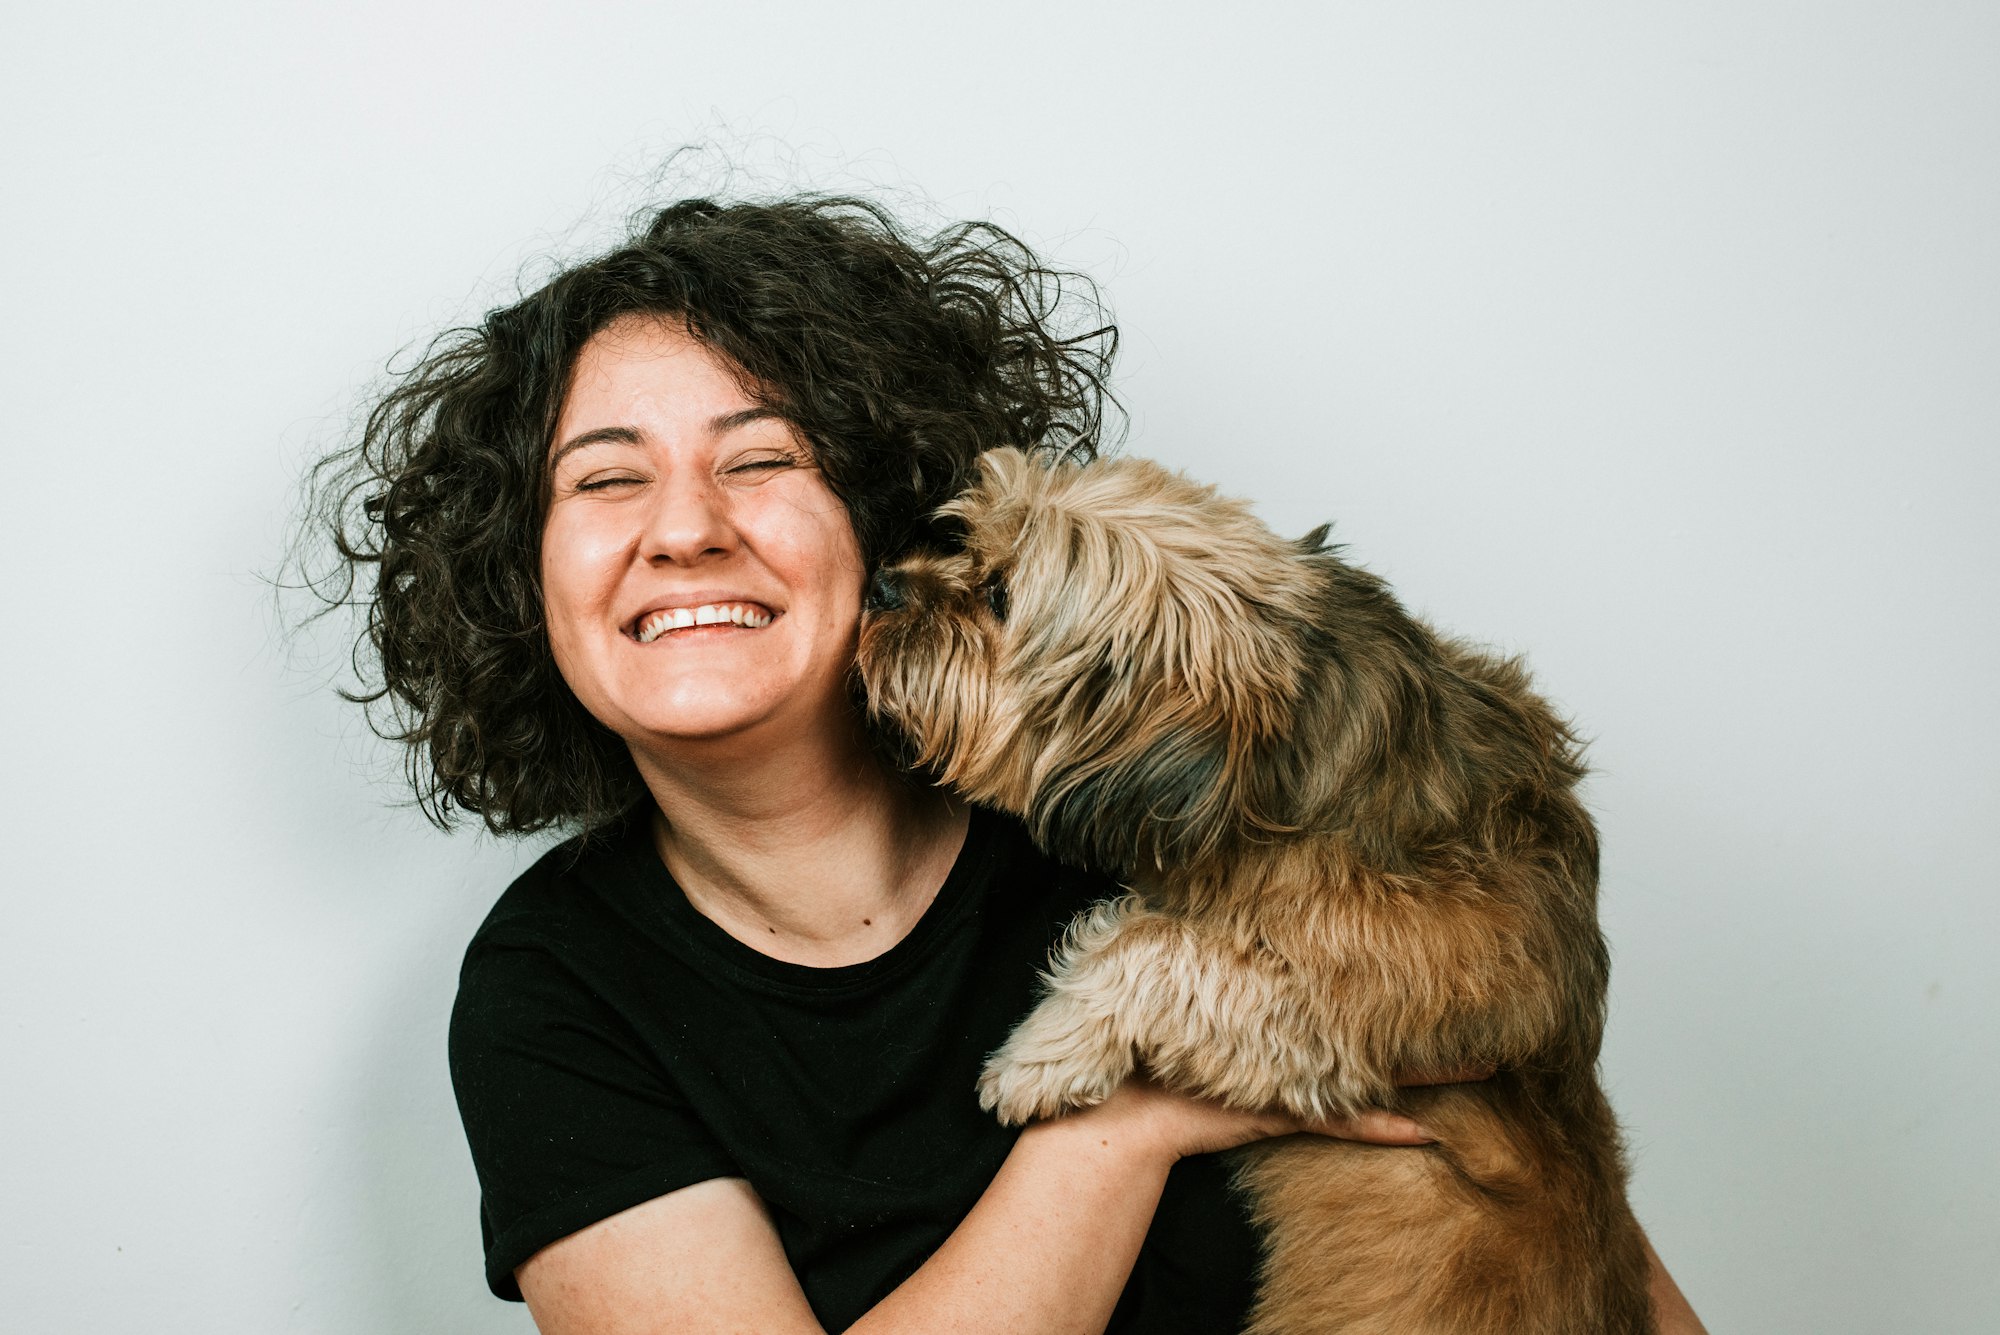 Girl laughing with dog